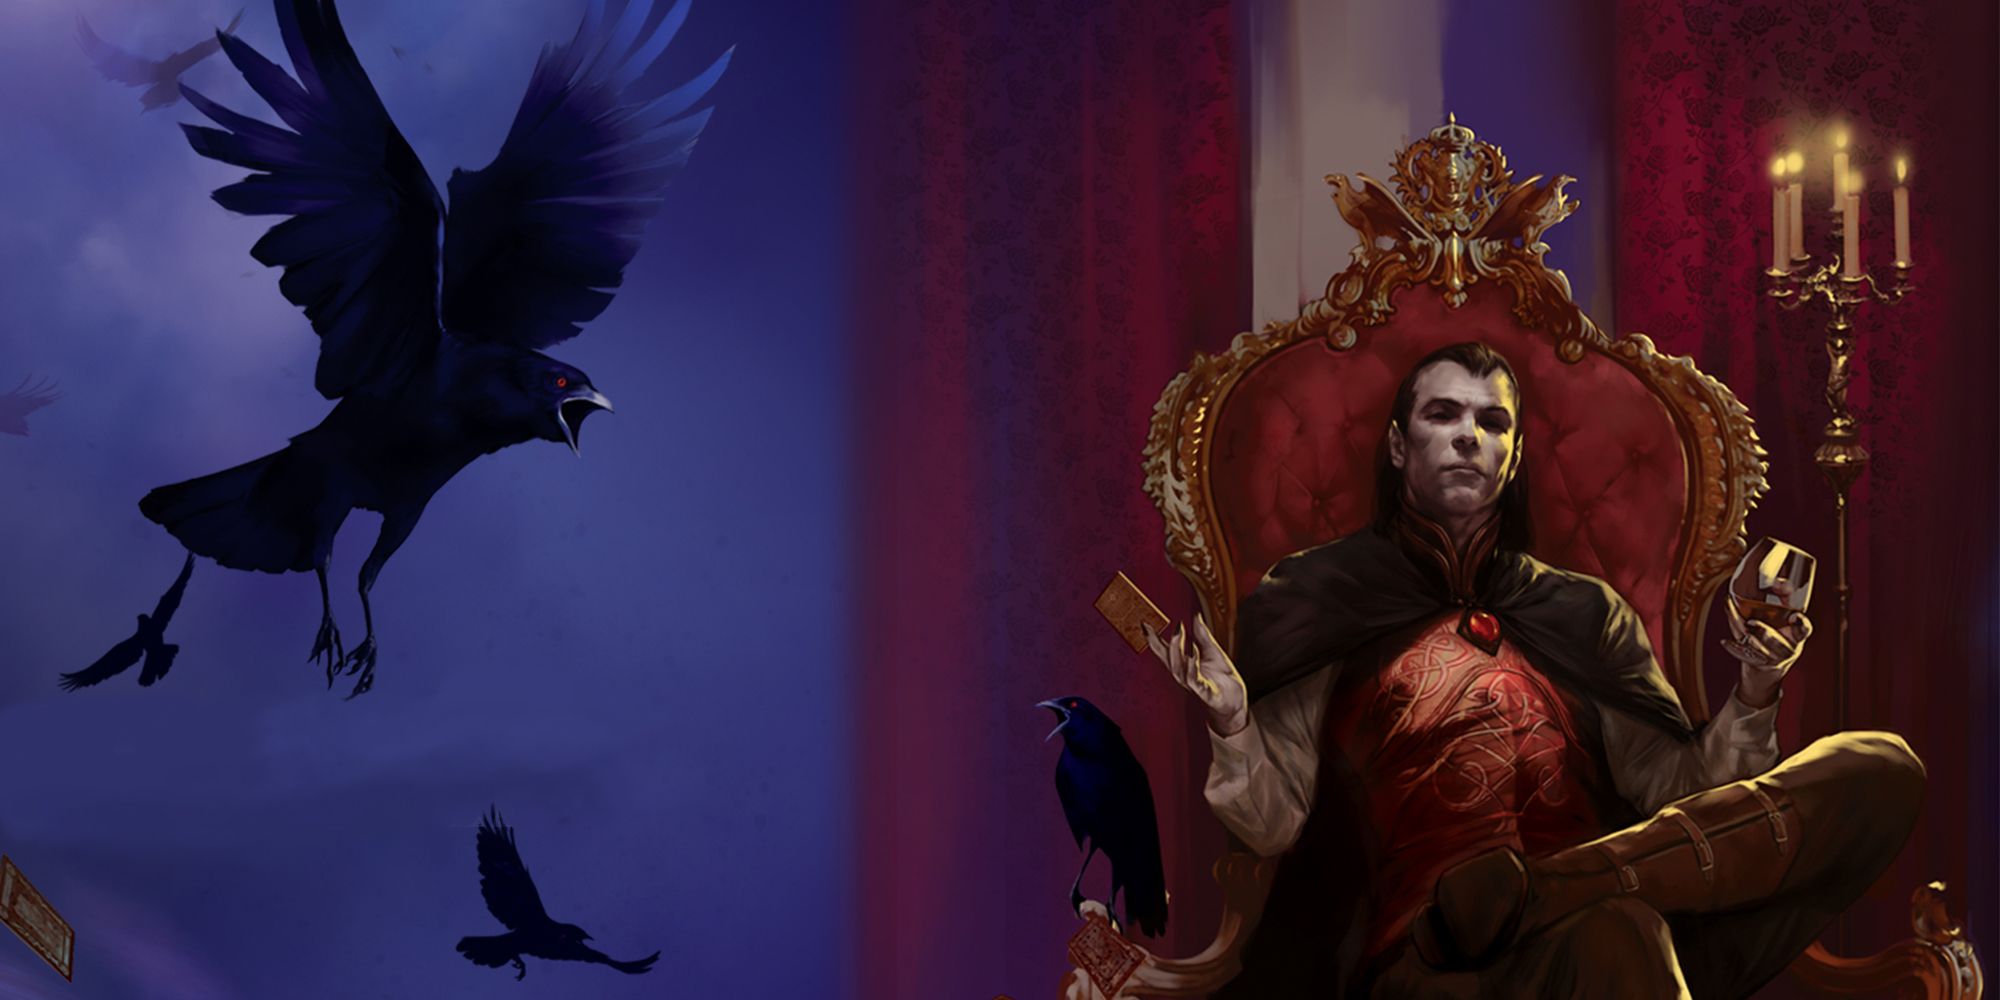 Curse Of Strahd Wallpaper, showing a vampire sitting on a throne and crows flying nearby